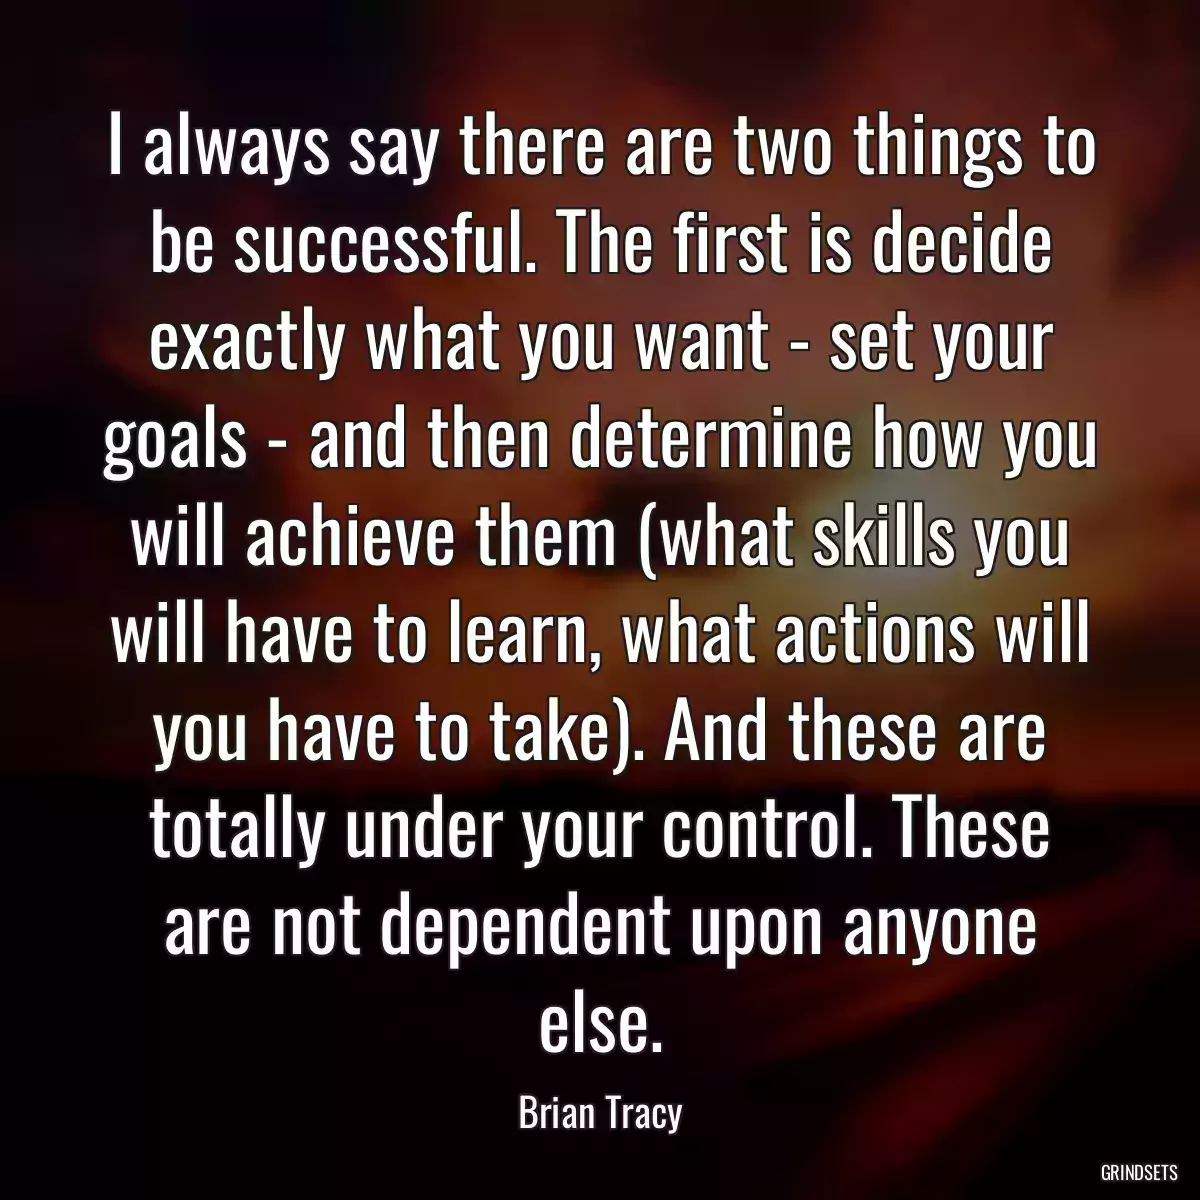 I always say there are two things to be successful. The first is decide exactly what you want - set your goals - and then determine how you will achieve them (what skills you will have to learn, what actions will you have to take). And these are totally under your control. These are not dependent upon anyone else.